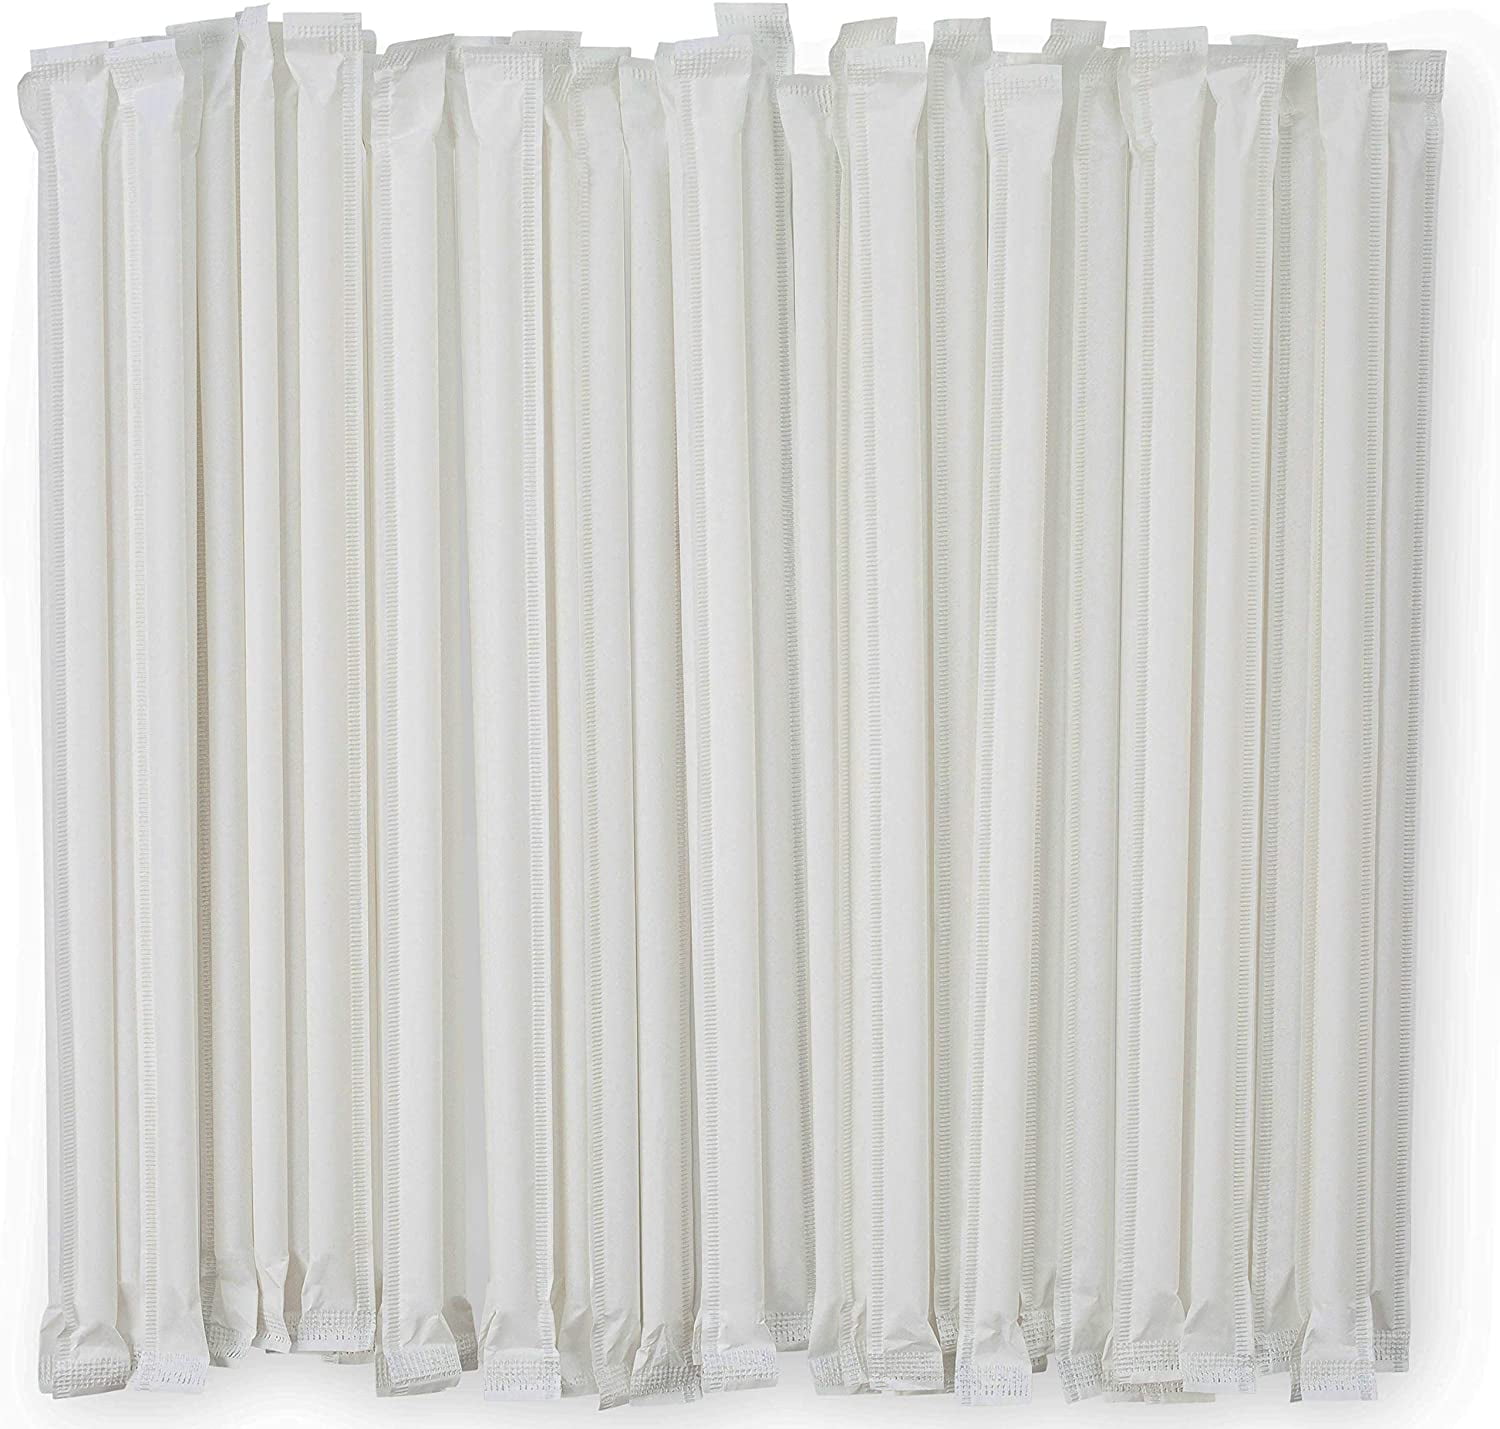 Individually Wrapped 300 Count Restaurant Grade Drinking Straws by Avant Grub 